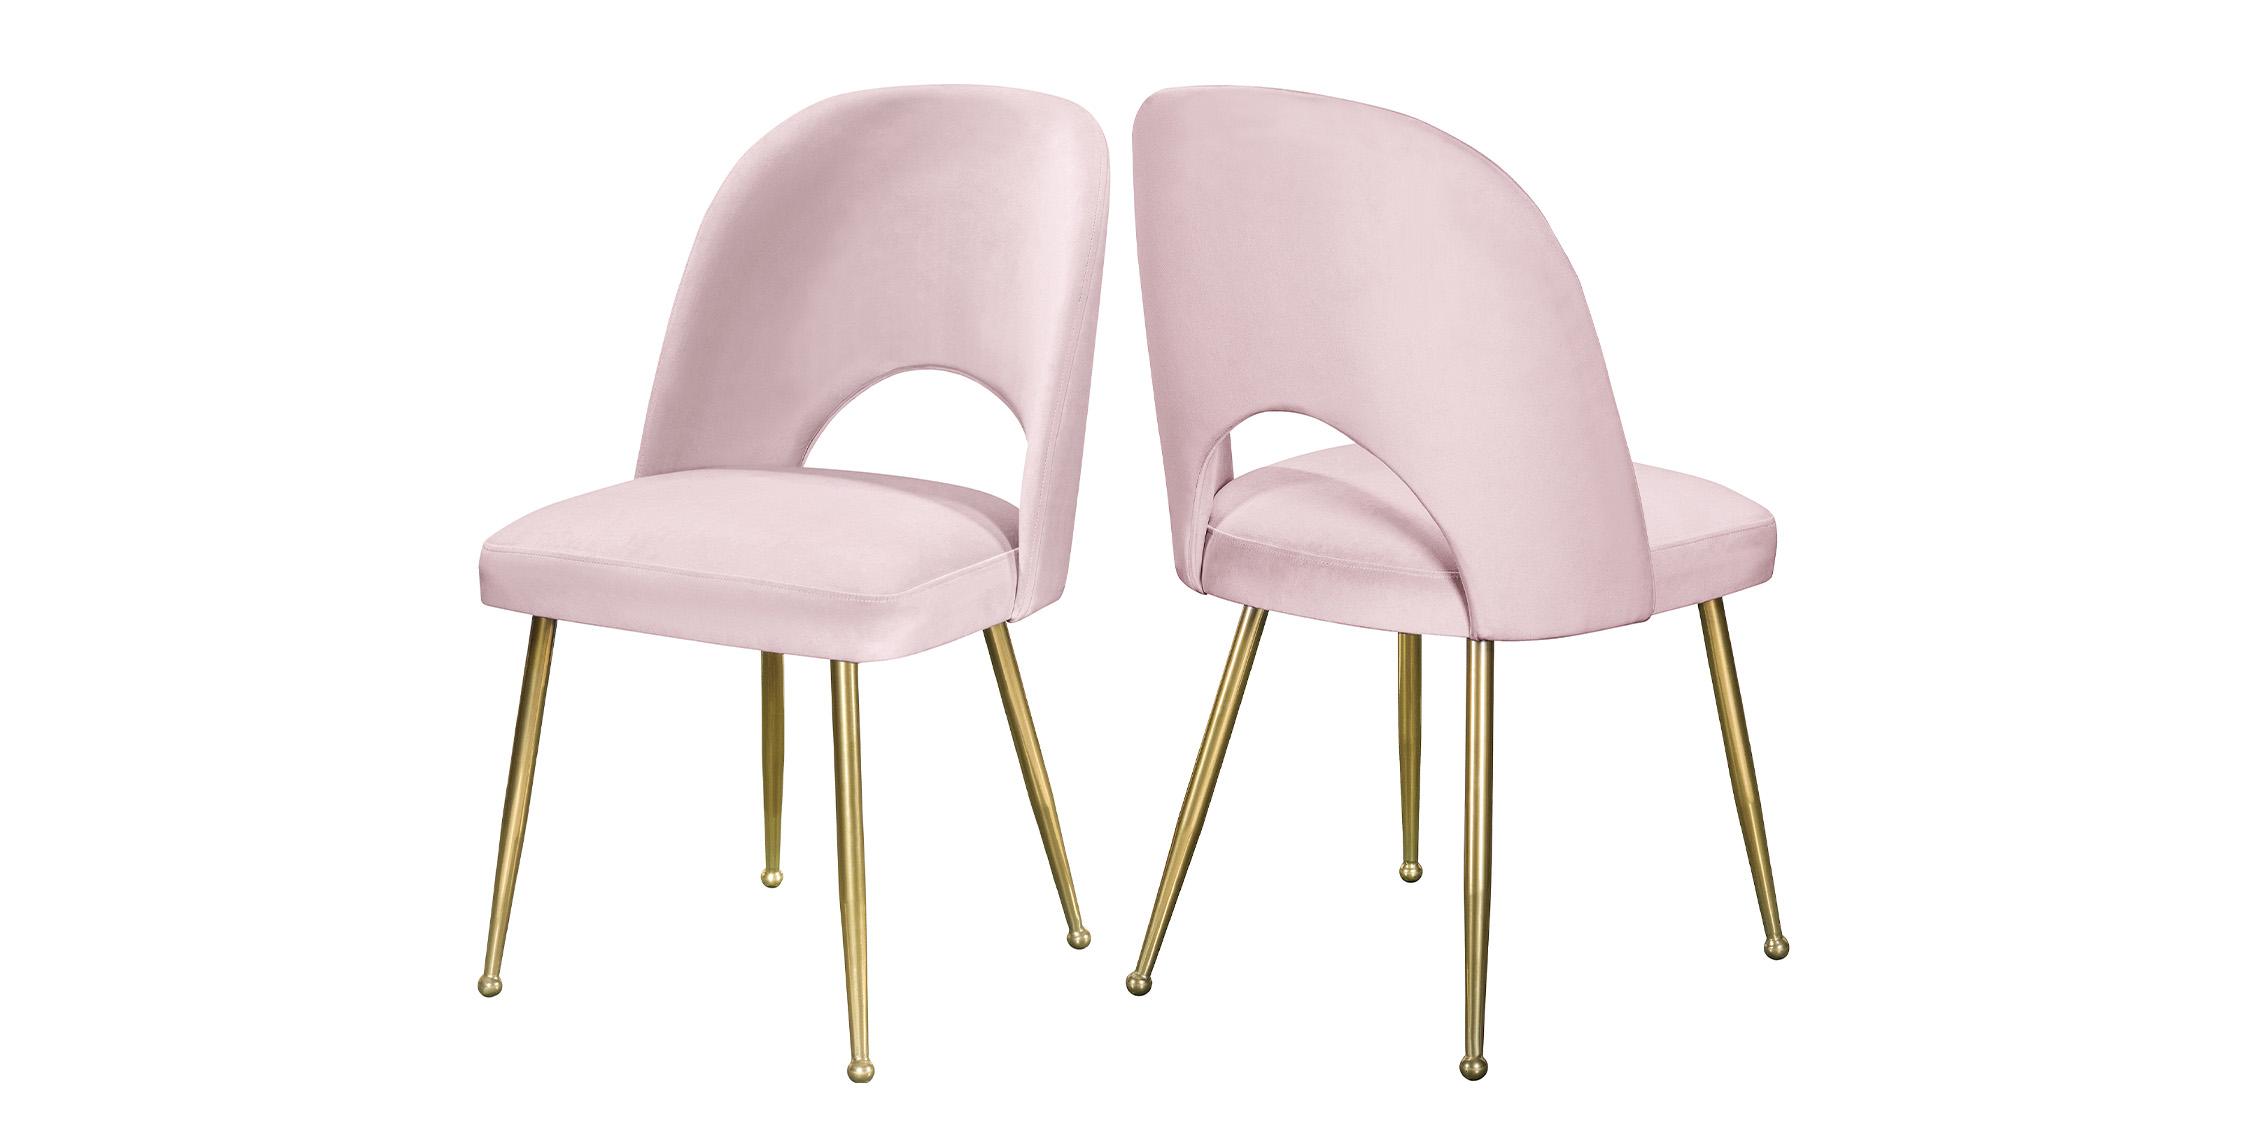 Contemporary, Modern Dining Chair Set LOGAN 990Pink-C 990Pink-C in Pink, Gold Fabric